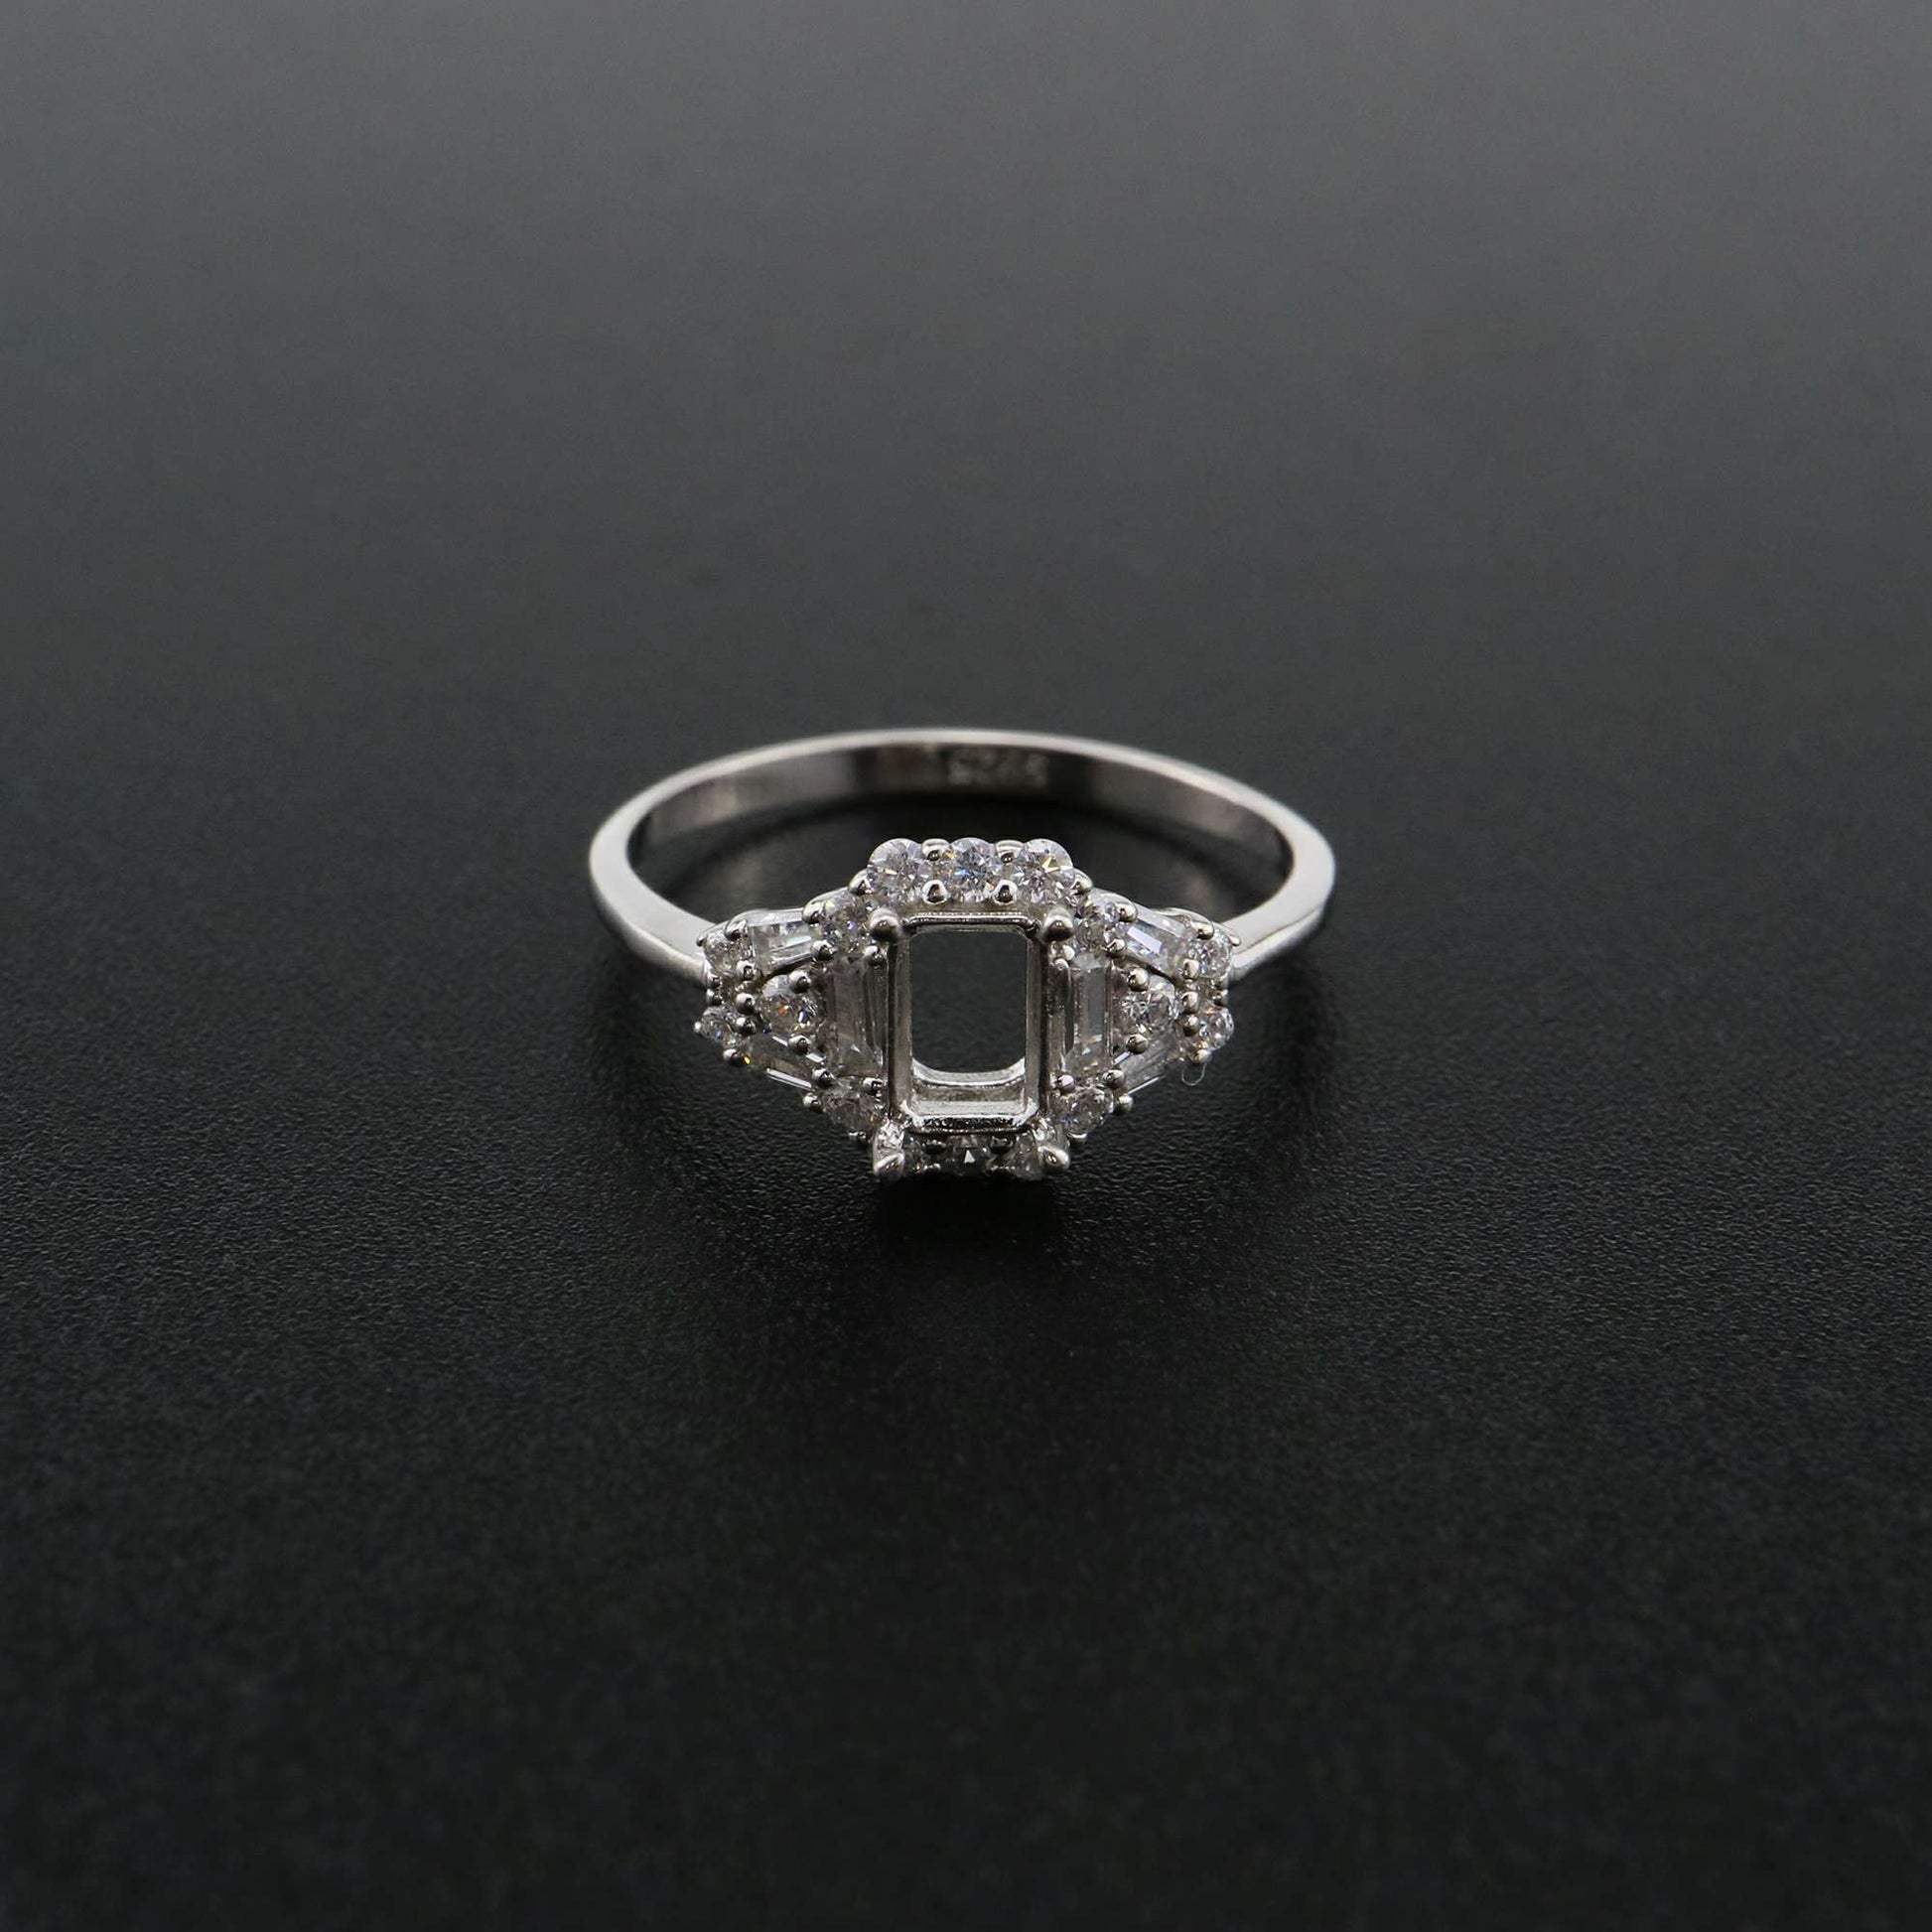 A silver emerald cut semi mount with a CZ halo of emerald and round cut gems.